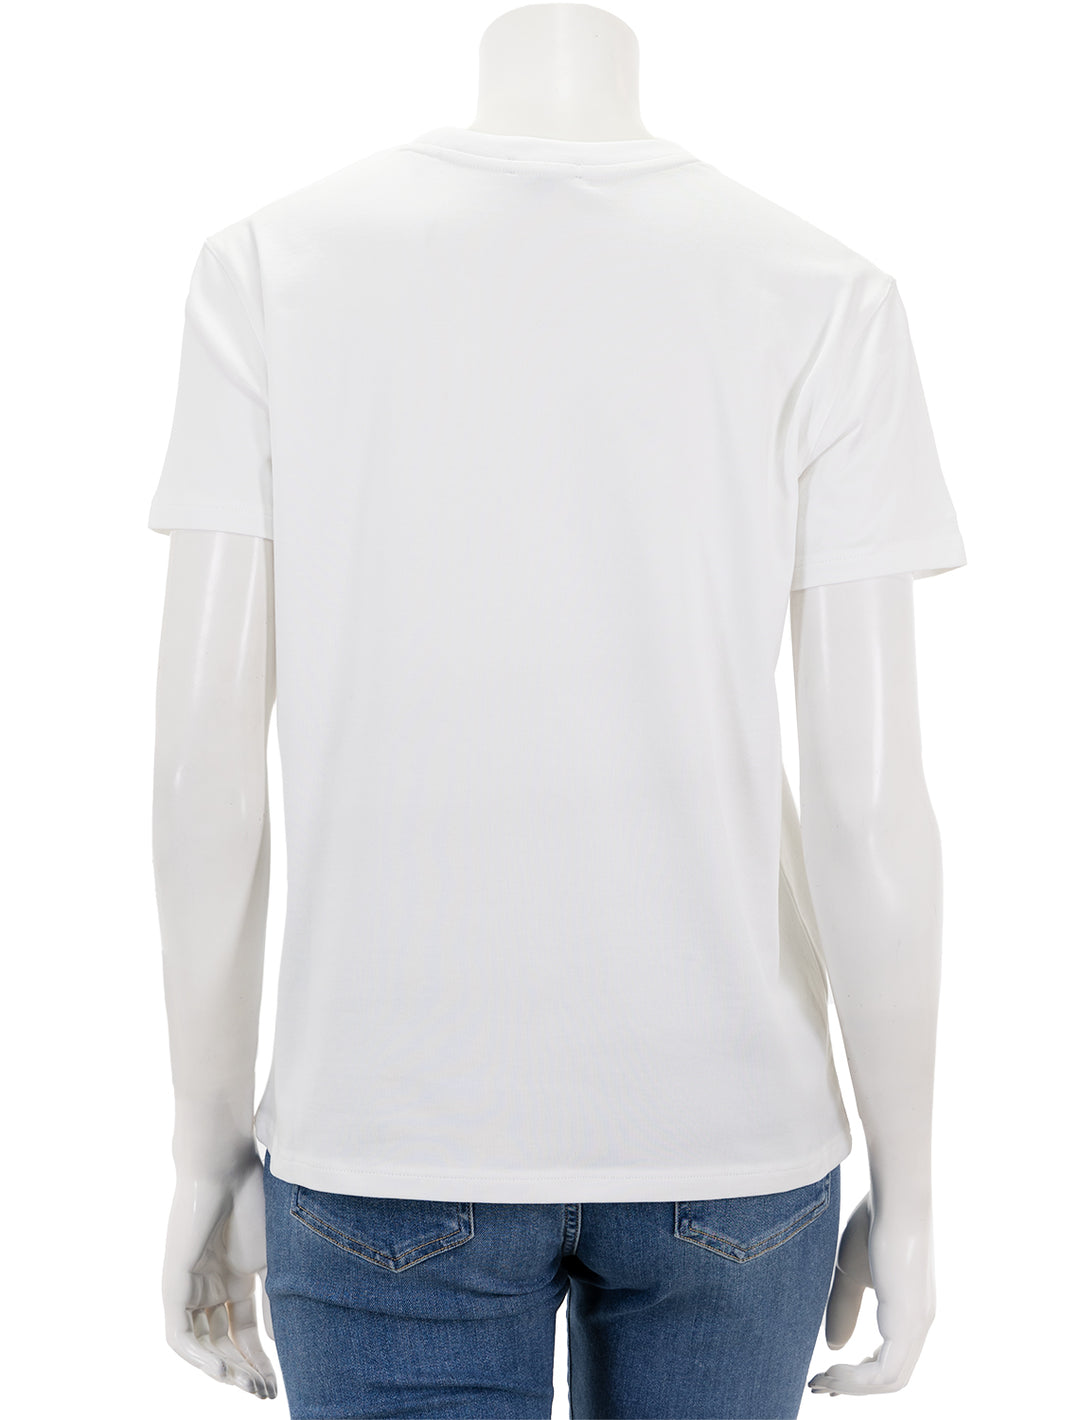 Back view of Patrick Assaraf's short sleeve iconic boyfriend crew in white.